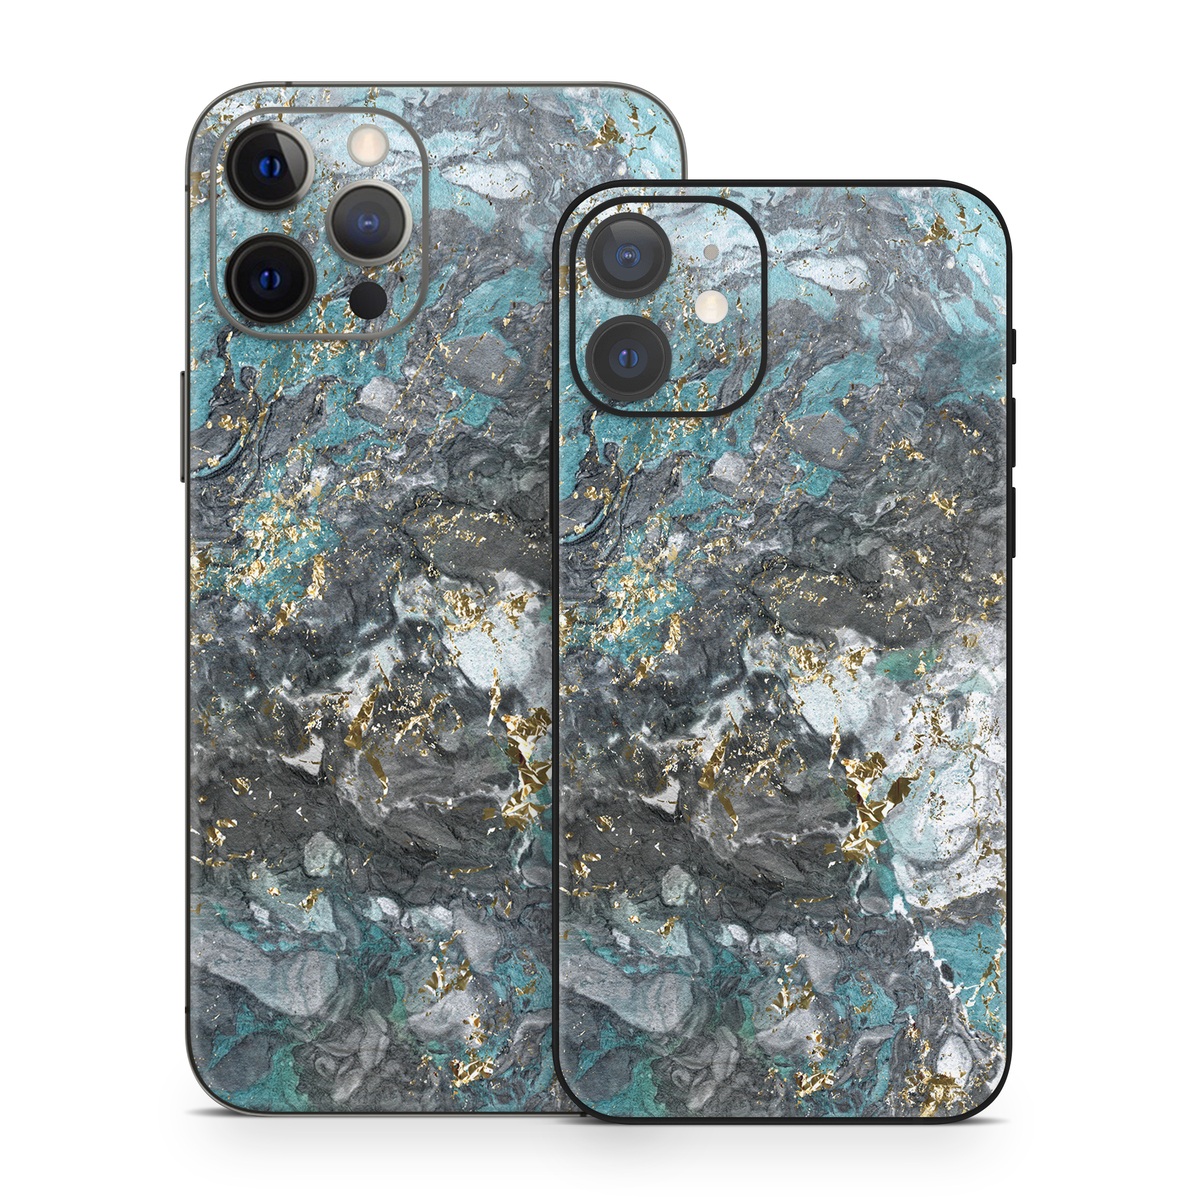  Skin design of Blue, Turquoise, Green, Aqua, Teal, Geology, Rock, Painting, Pattern, with black, white, gray, green, blue colors